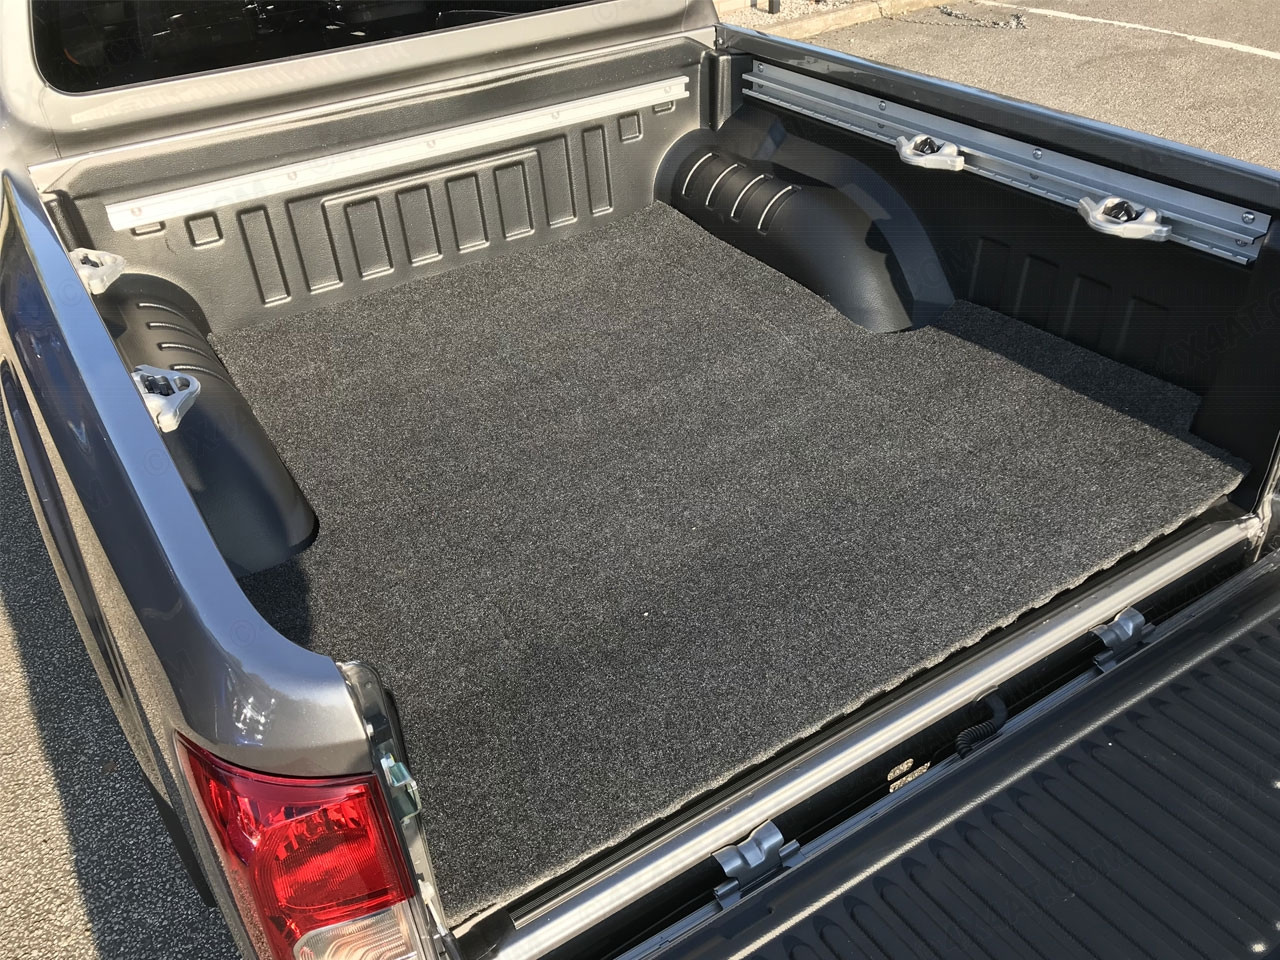 Ford Ranger T6 2016 on Double Cab Load Bed Carpet Mat Non Slip Boot Mat 